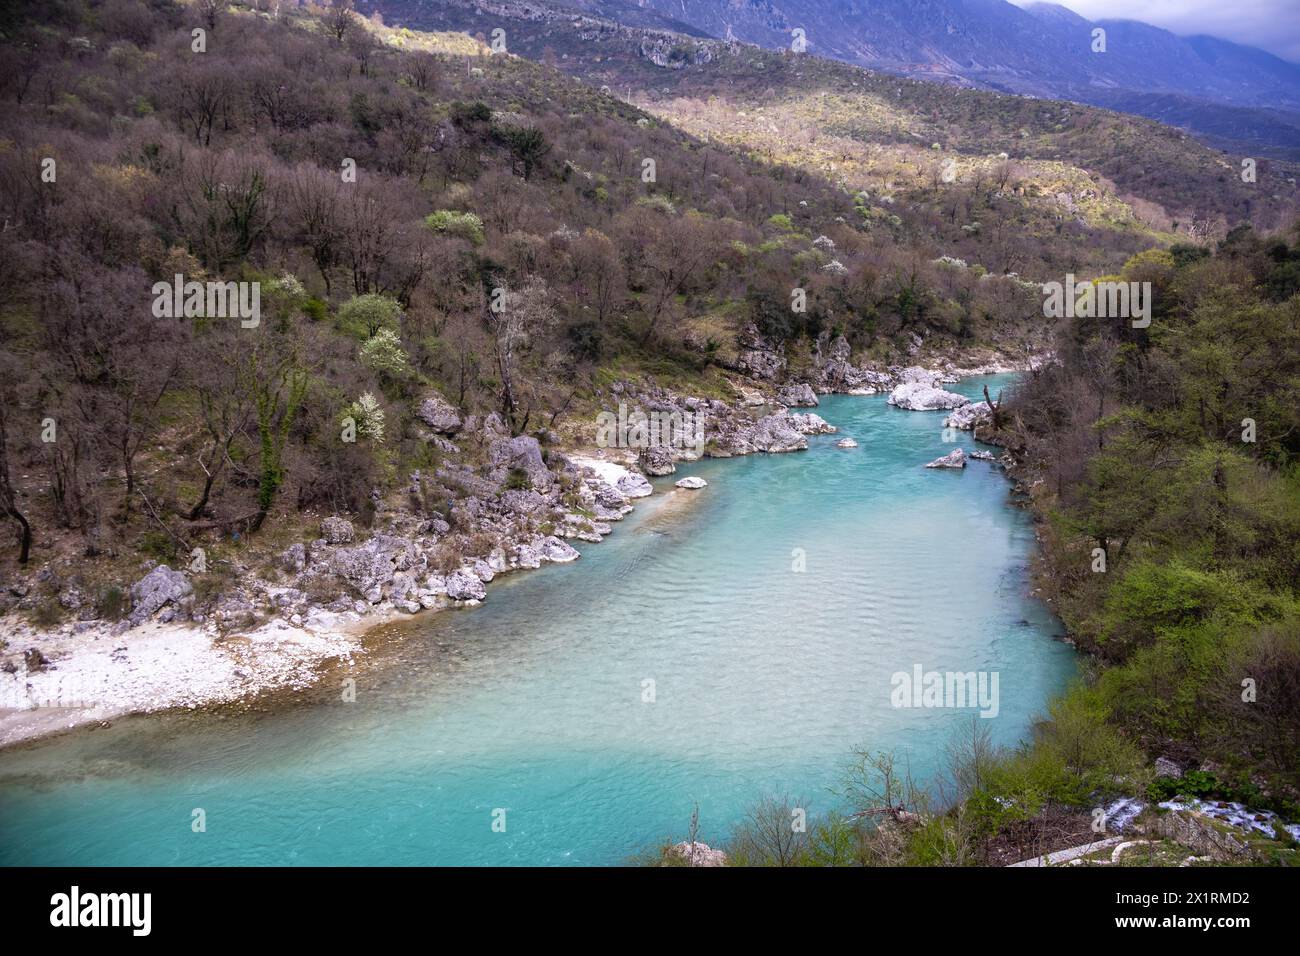 Flowing river at early springtime Stock Photo